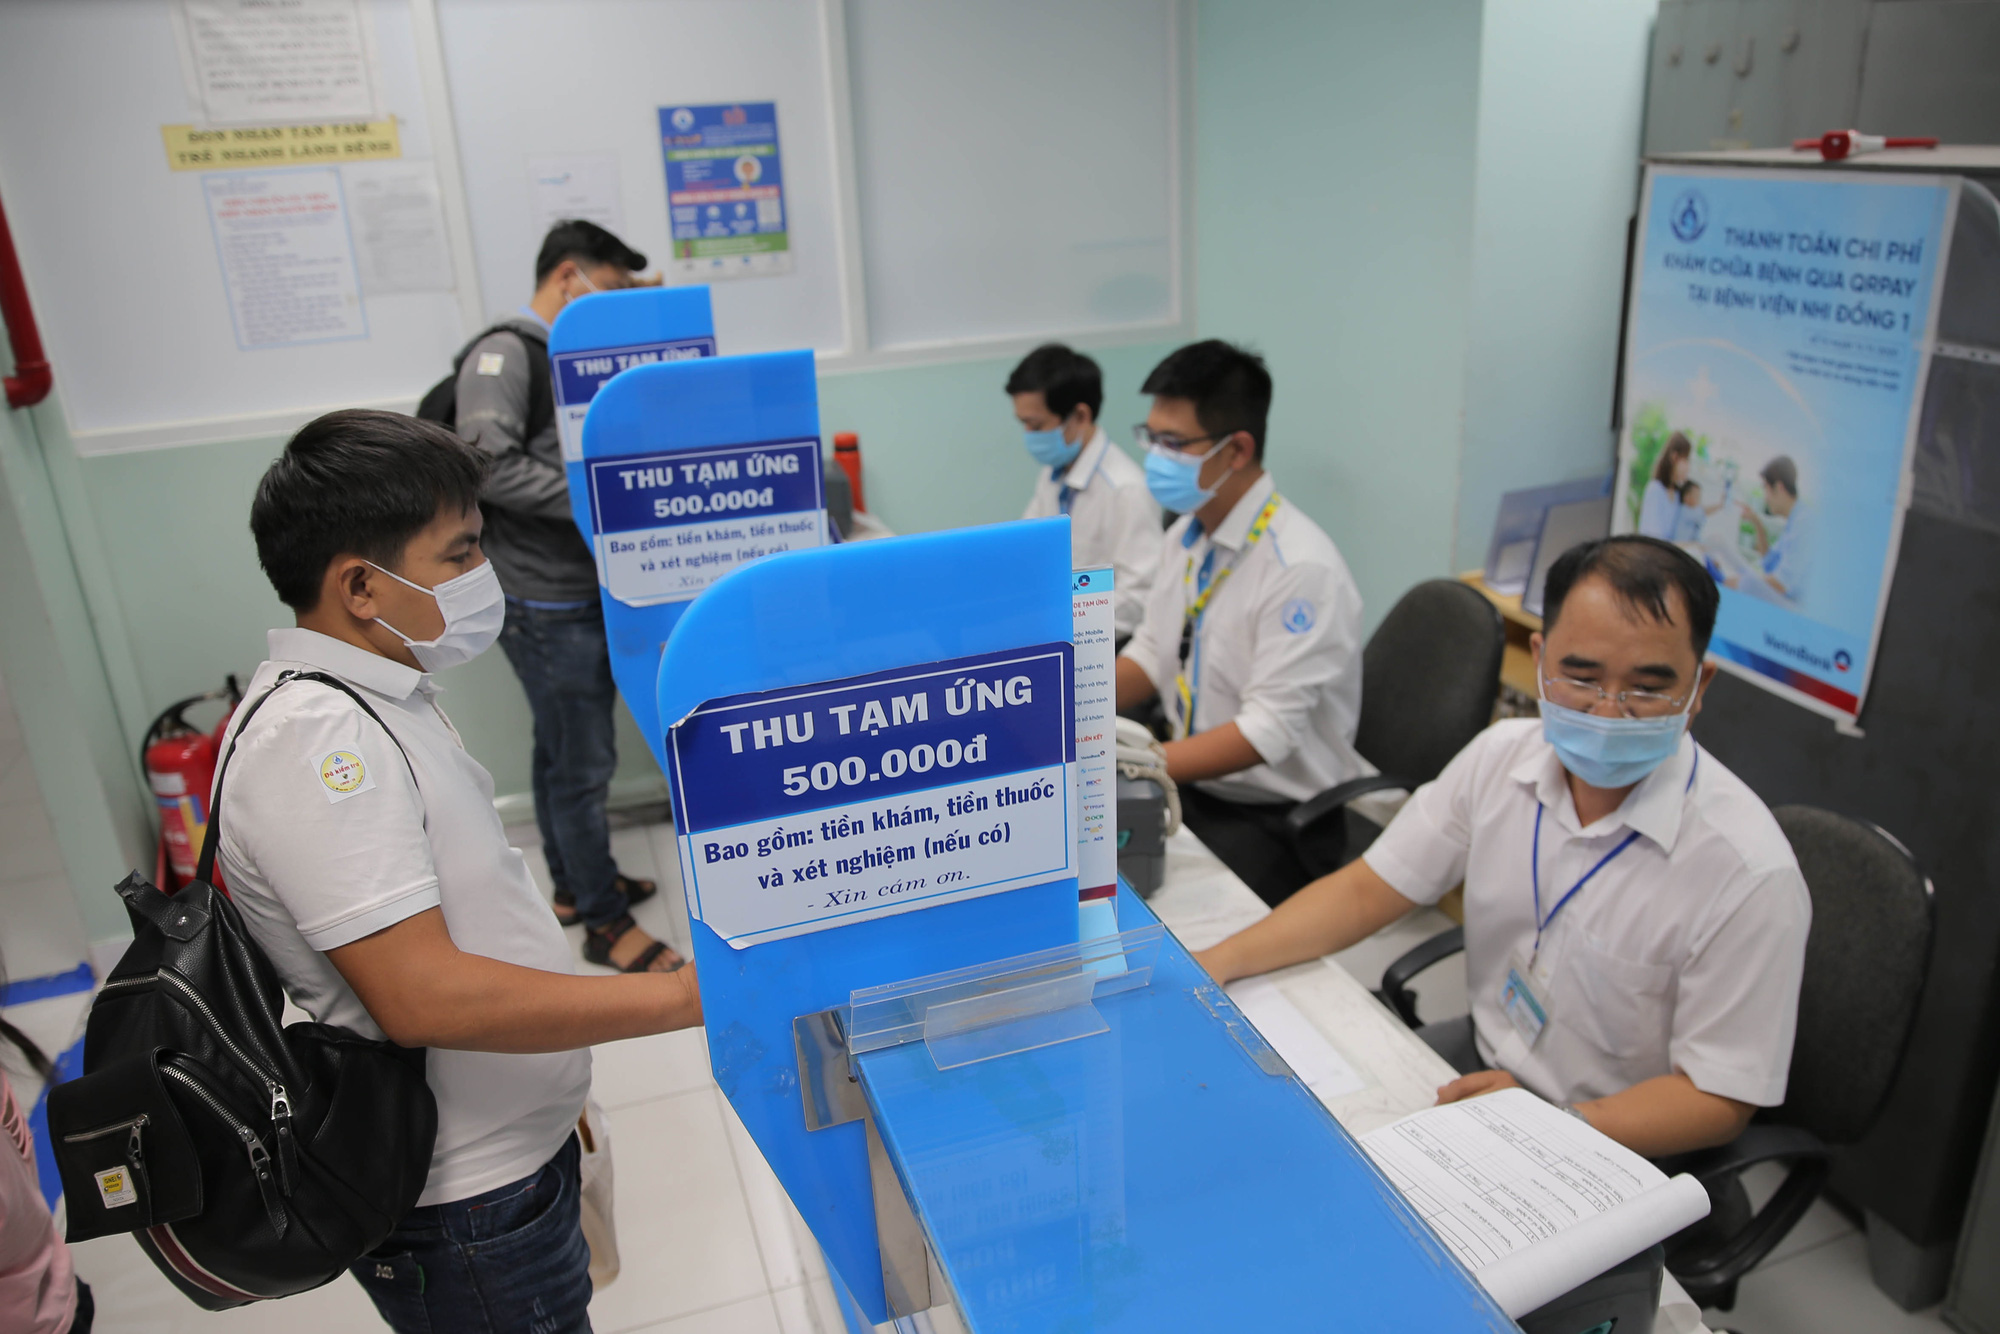 When are employees entitled to sickness benefits in Vietnam?